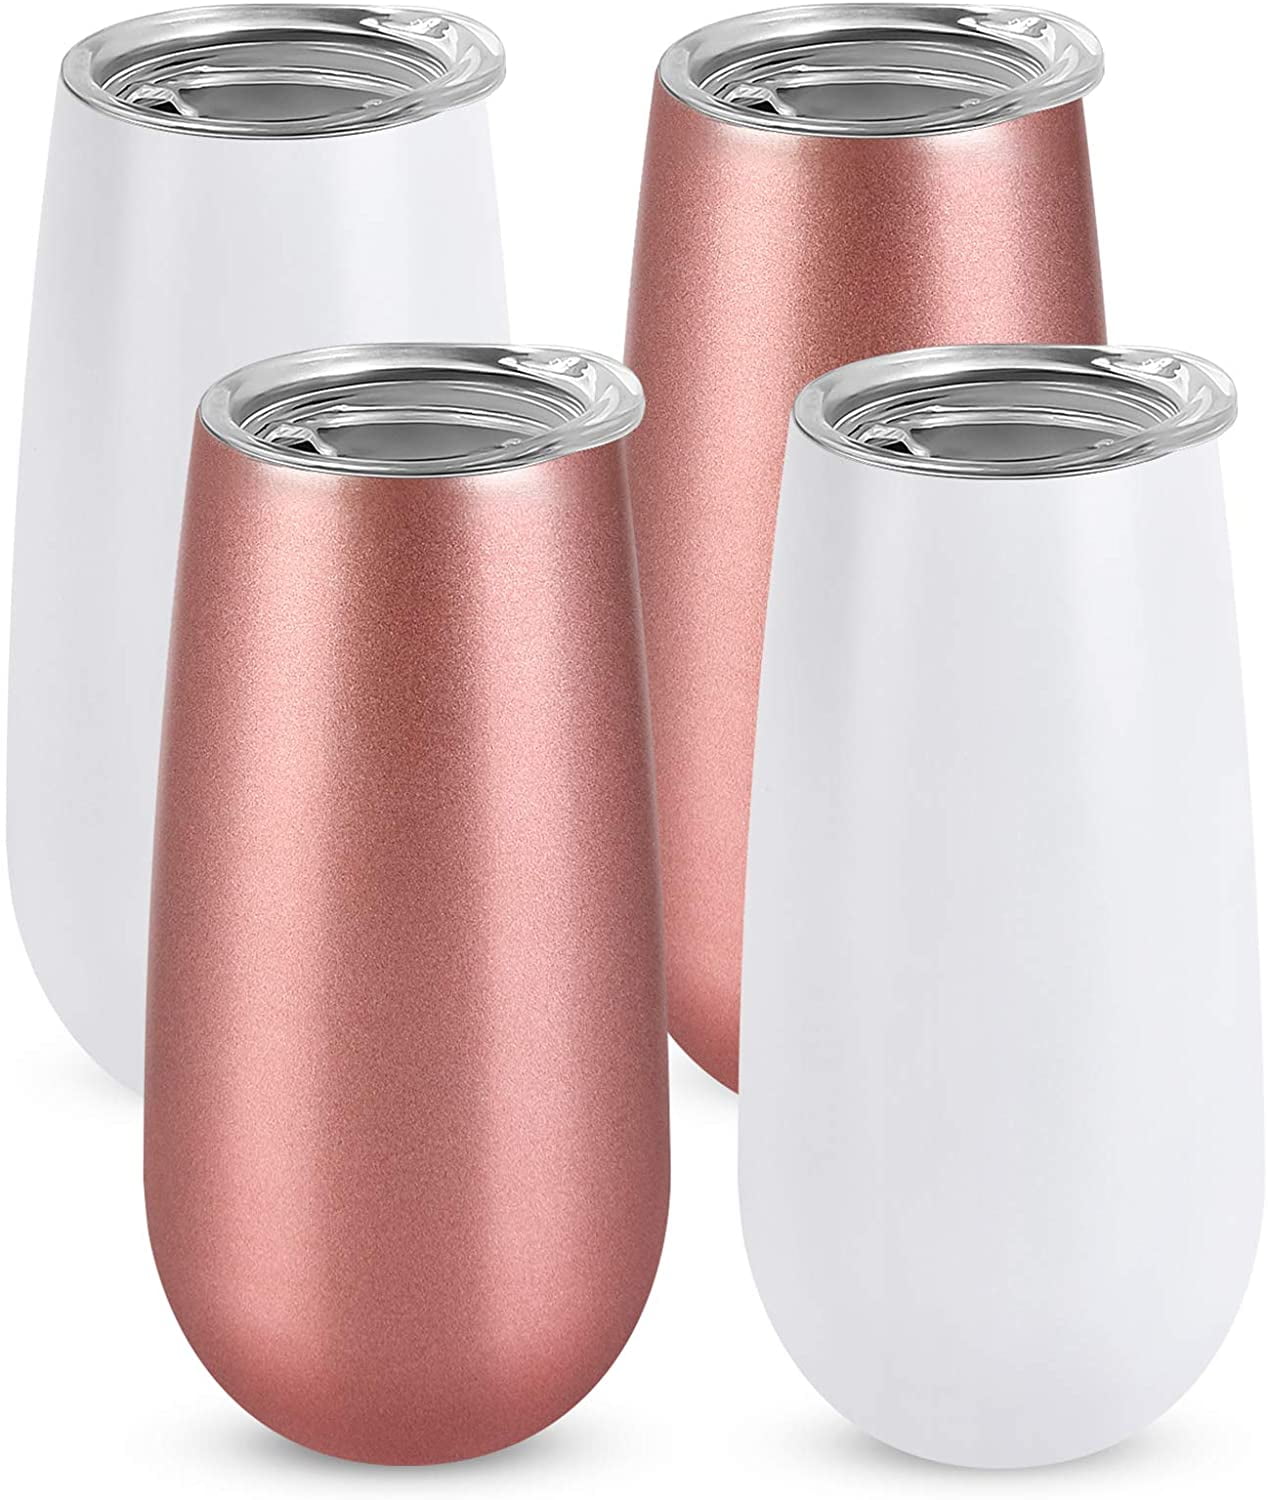 Elegant Box Wine Toyz Stemless Champagne Flutes 4 Red Cups 6 Oz Reusable Stainless Steel Double Insulated Unbreakable Tumblers with Unbreakable Lids Wine Glass Marking Pens Enjoy Champagne